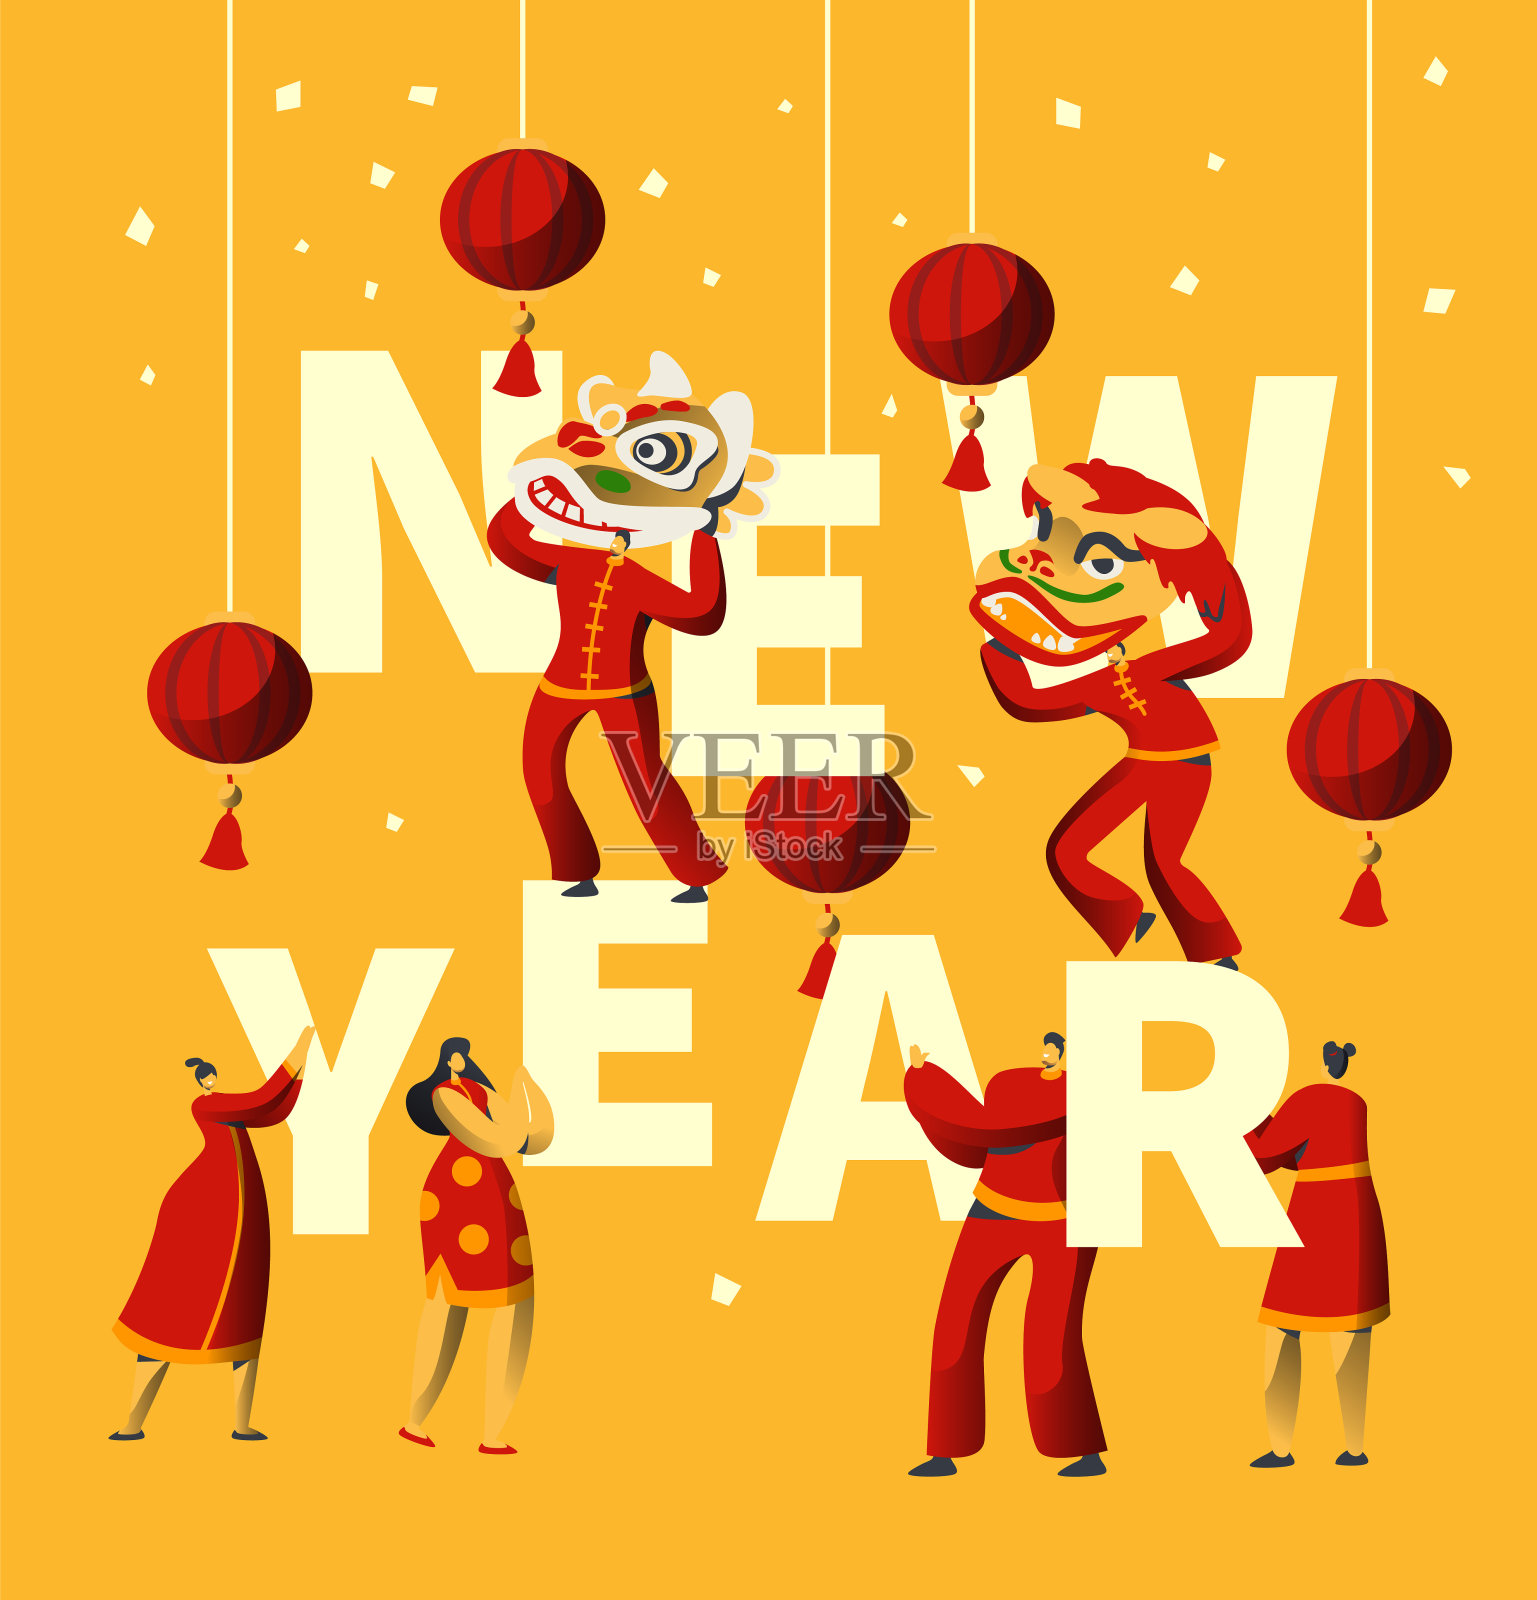 Chinese New Year Festival Typography Banner. Man Dance in Red Dragon Mask for China Holiday Celebration. Asian Traditional Lantern Festival Greeting Card Template Flat Cartoon Vector Illustration插画图片素材